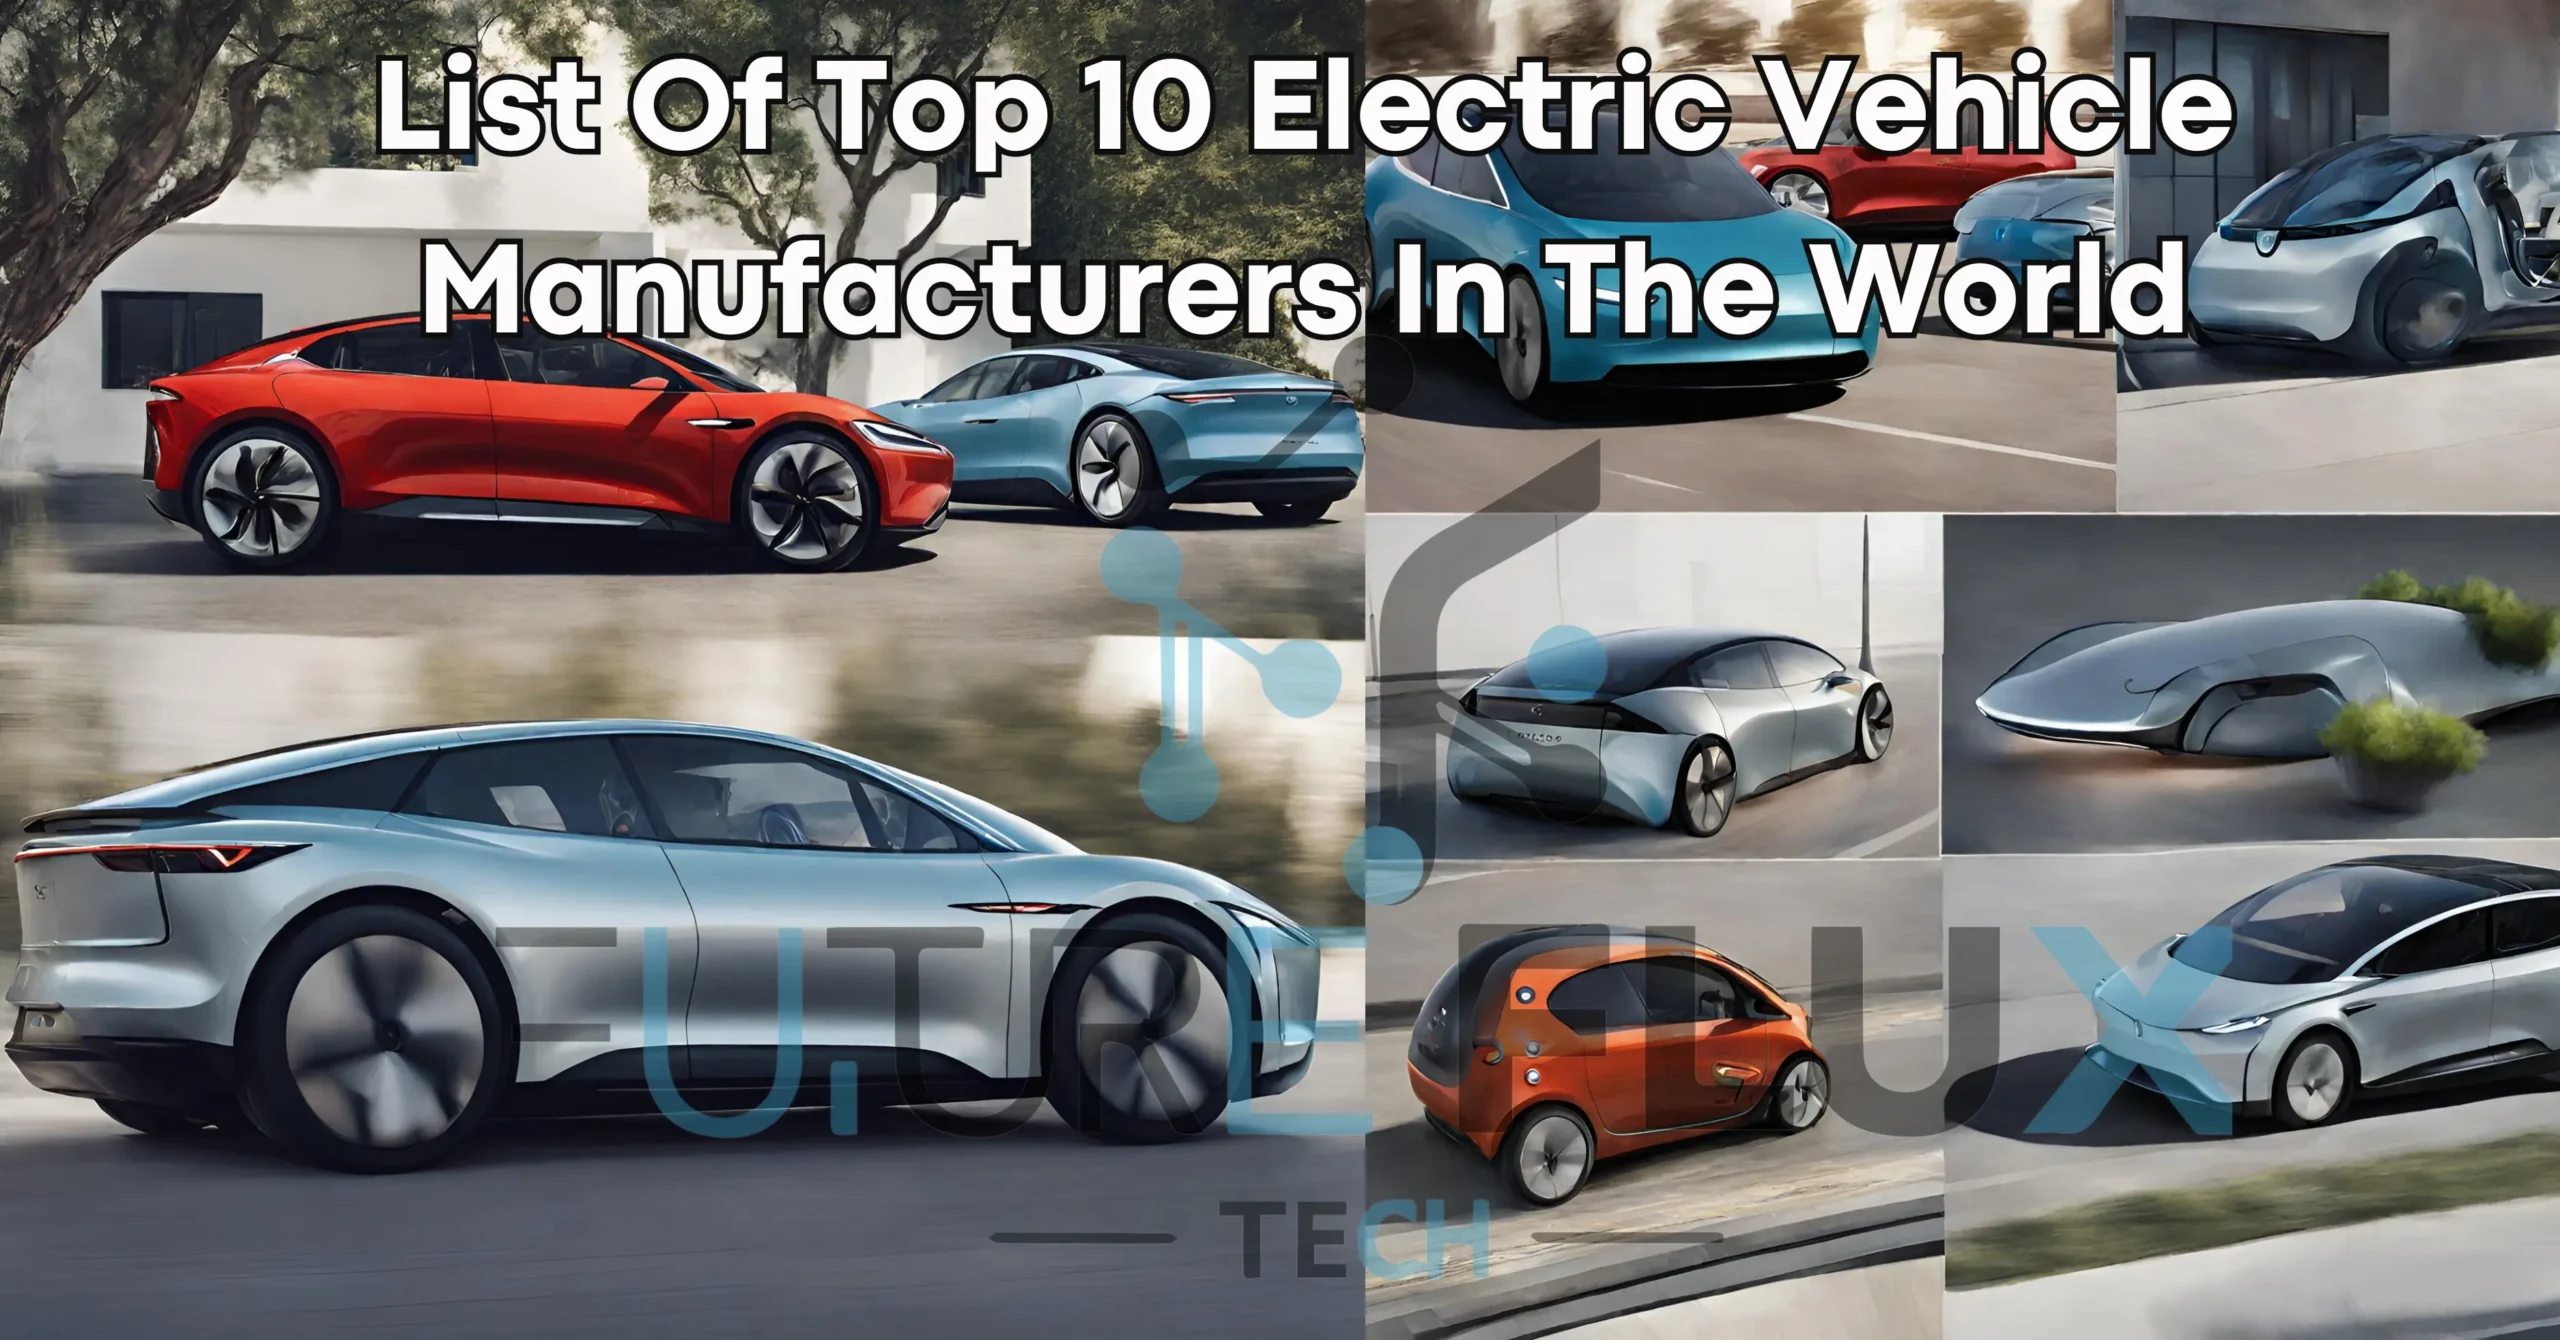 List Of Top 10 Electric Vehicle Manufacturers In The World